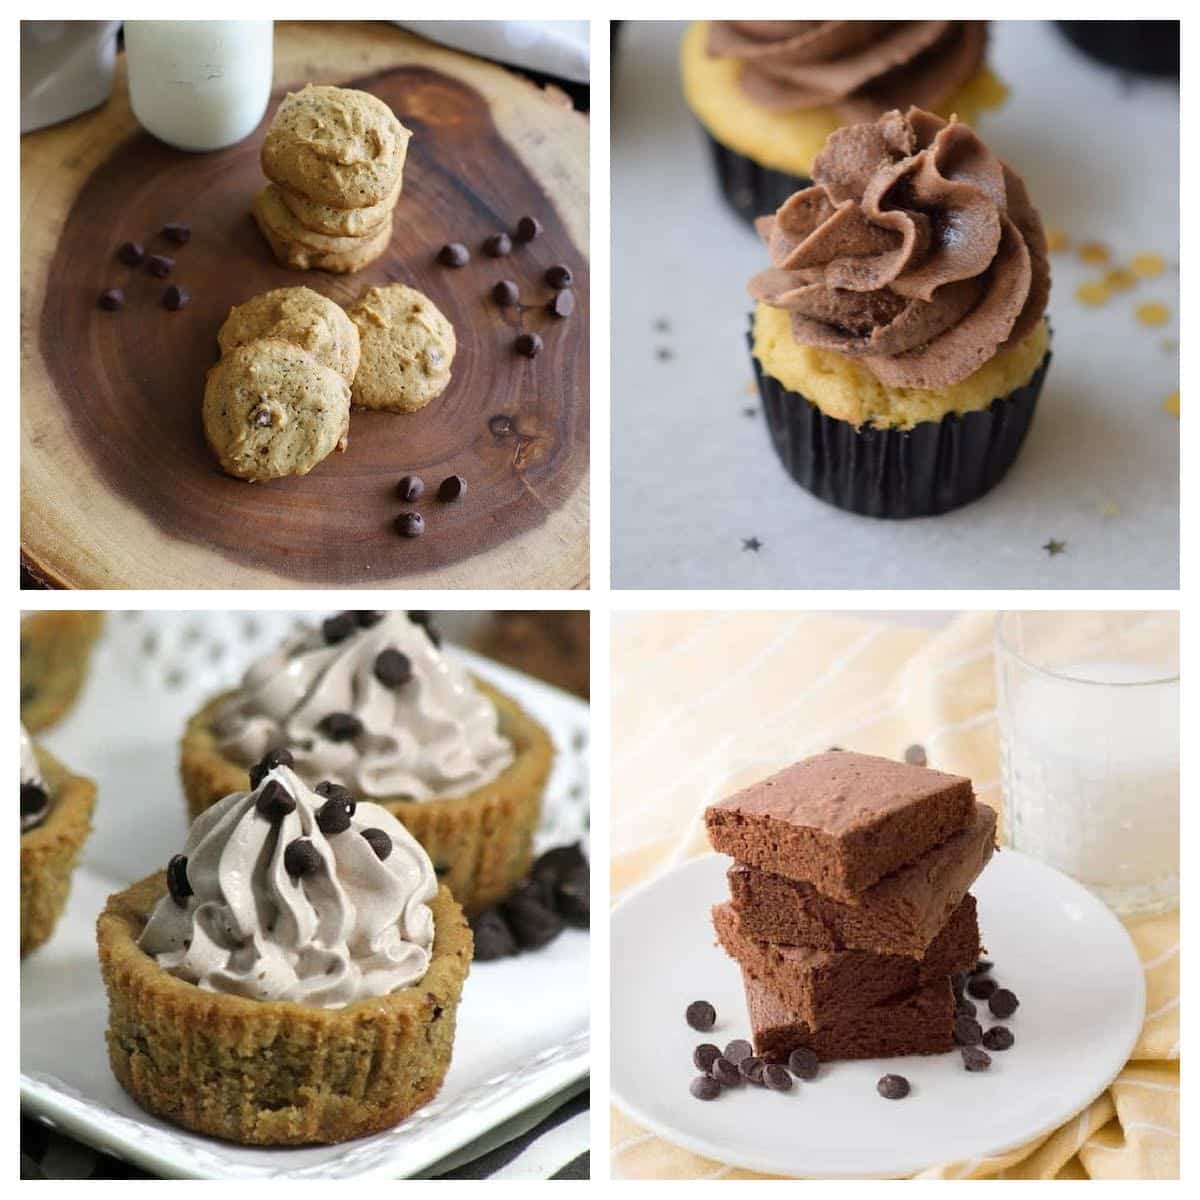 Chocolate chip dessert photos in a collage.